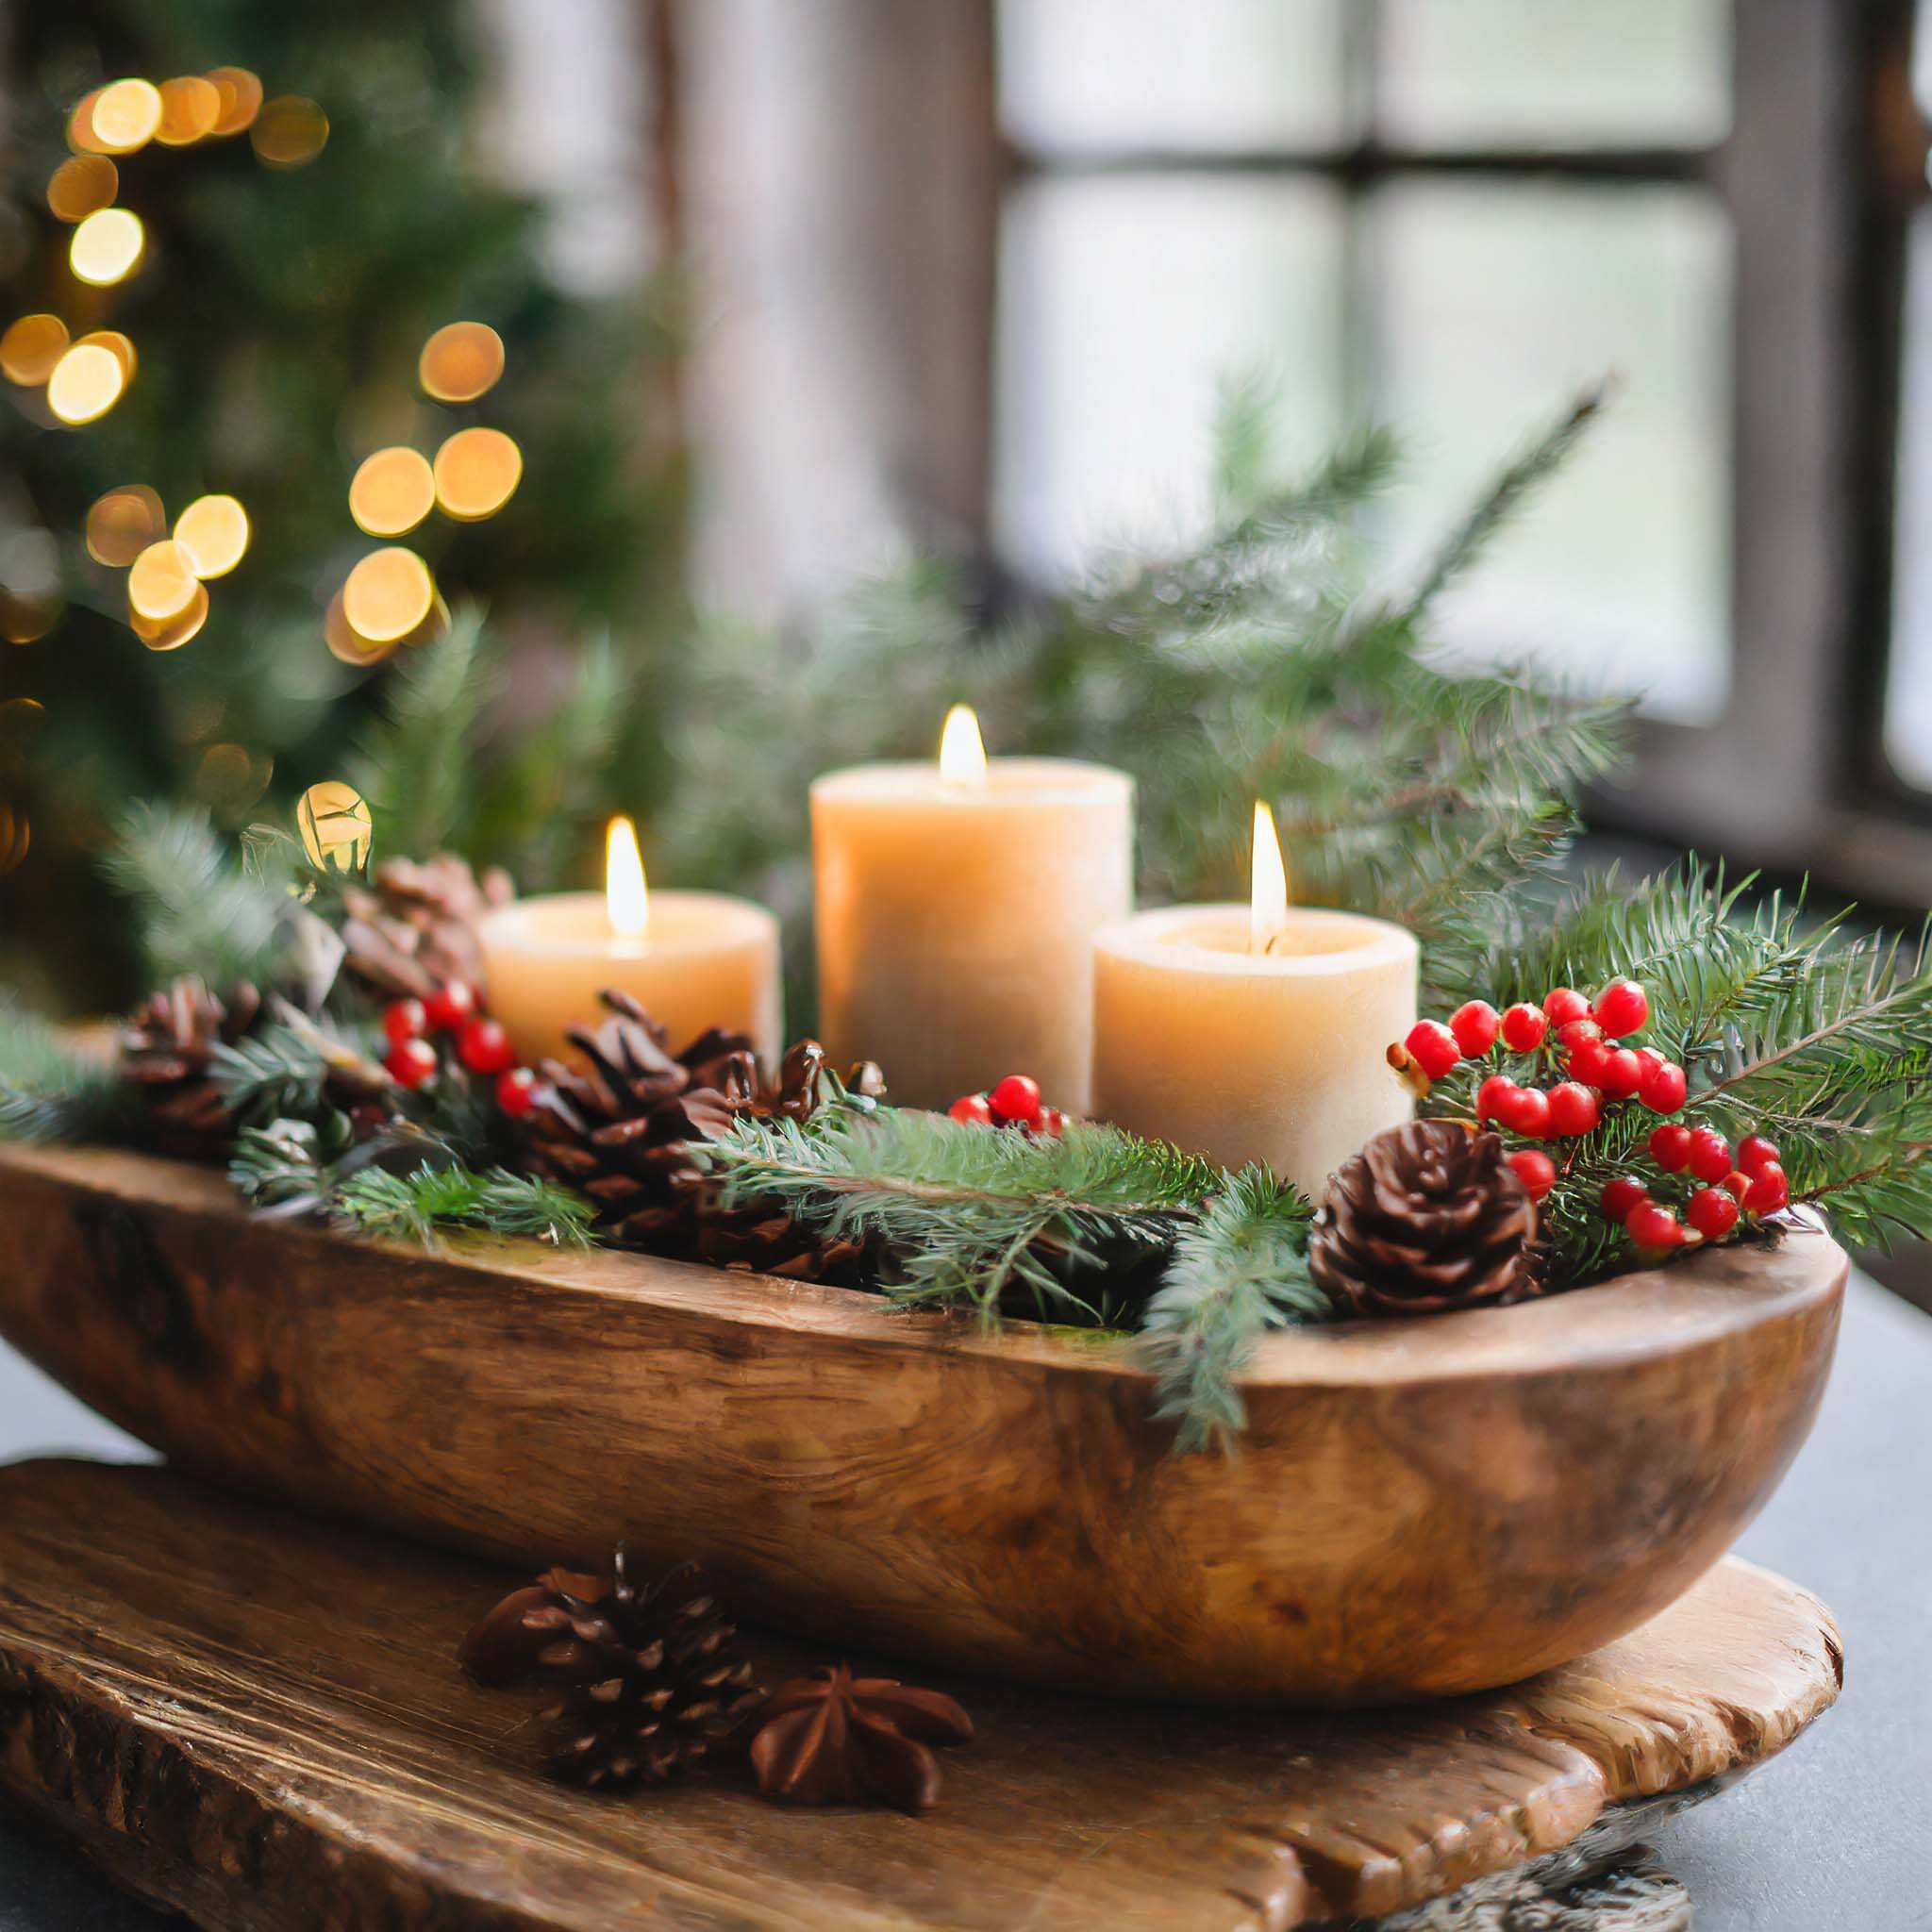 Wooden dough bowl filled with candles, berry sprays, pine cones, and pine tree cuttings.